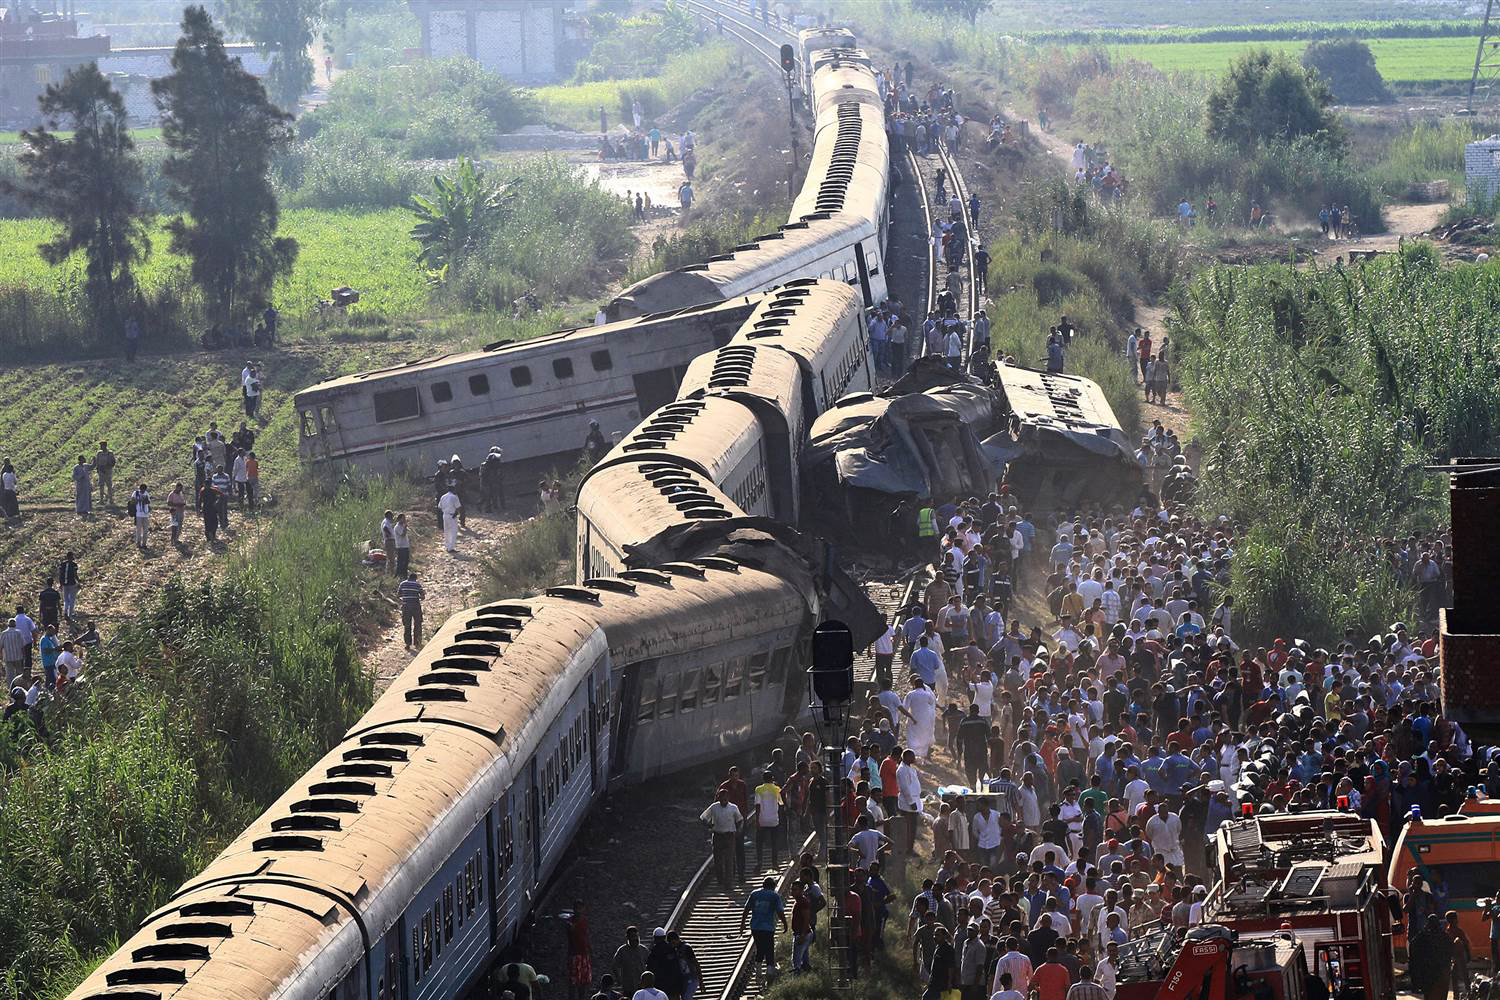 Alexandria train collision: At least 41 people are killed and another 179 injured after two passenger trains collide in Alexandria, Egypt.